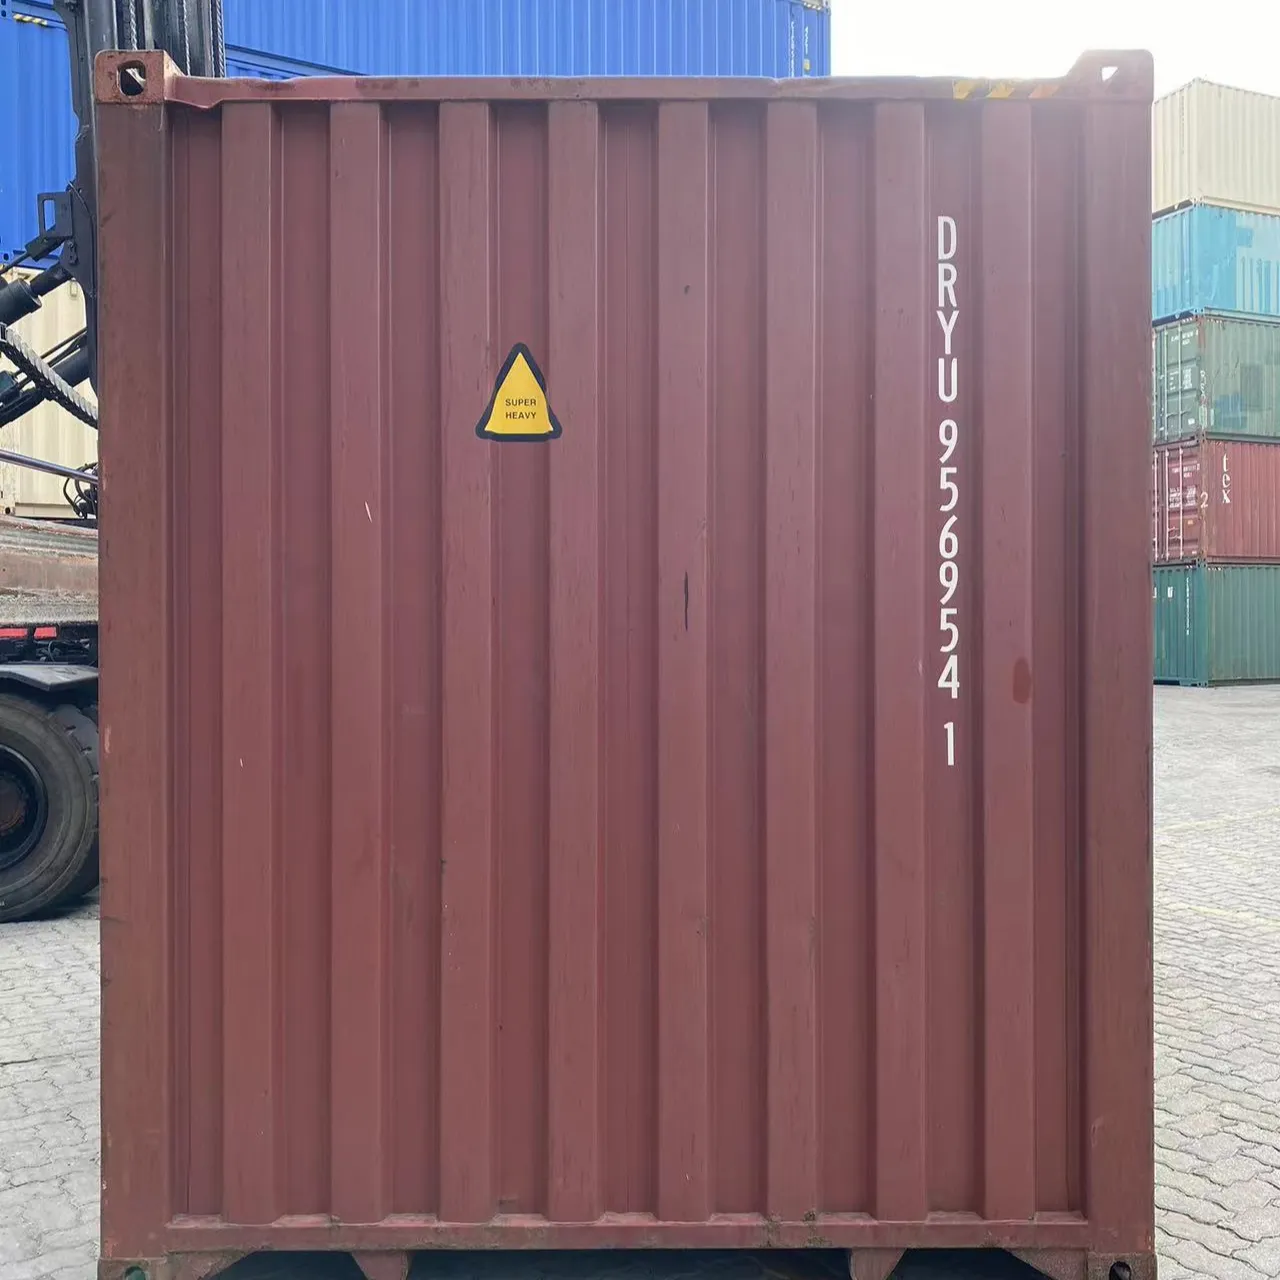 Soc container để bán sử dụng container New 40hc 40ft container từ Trung Quốc đến mỹ